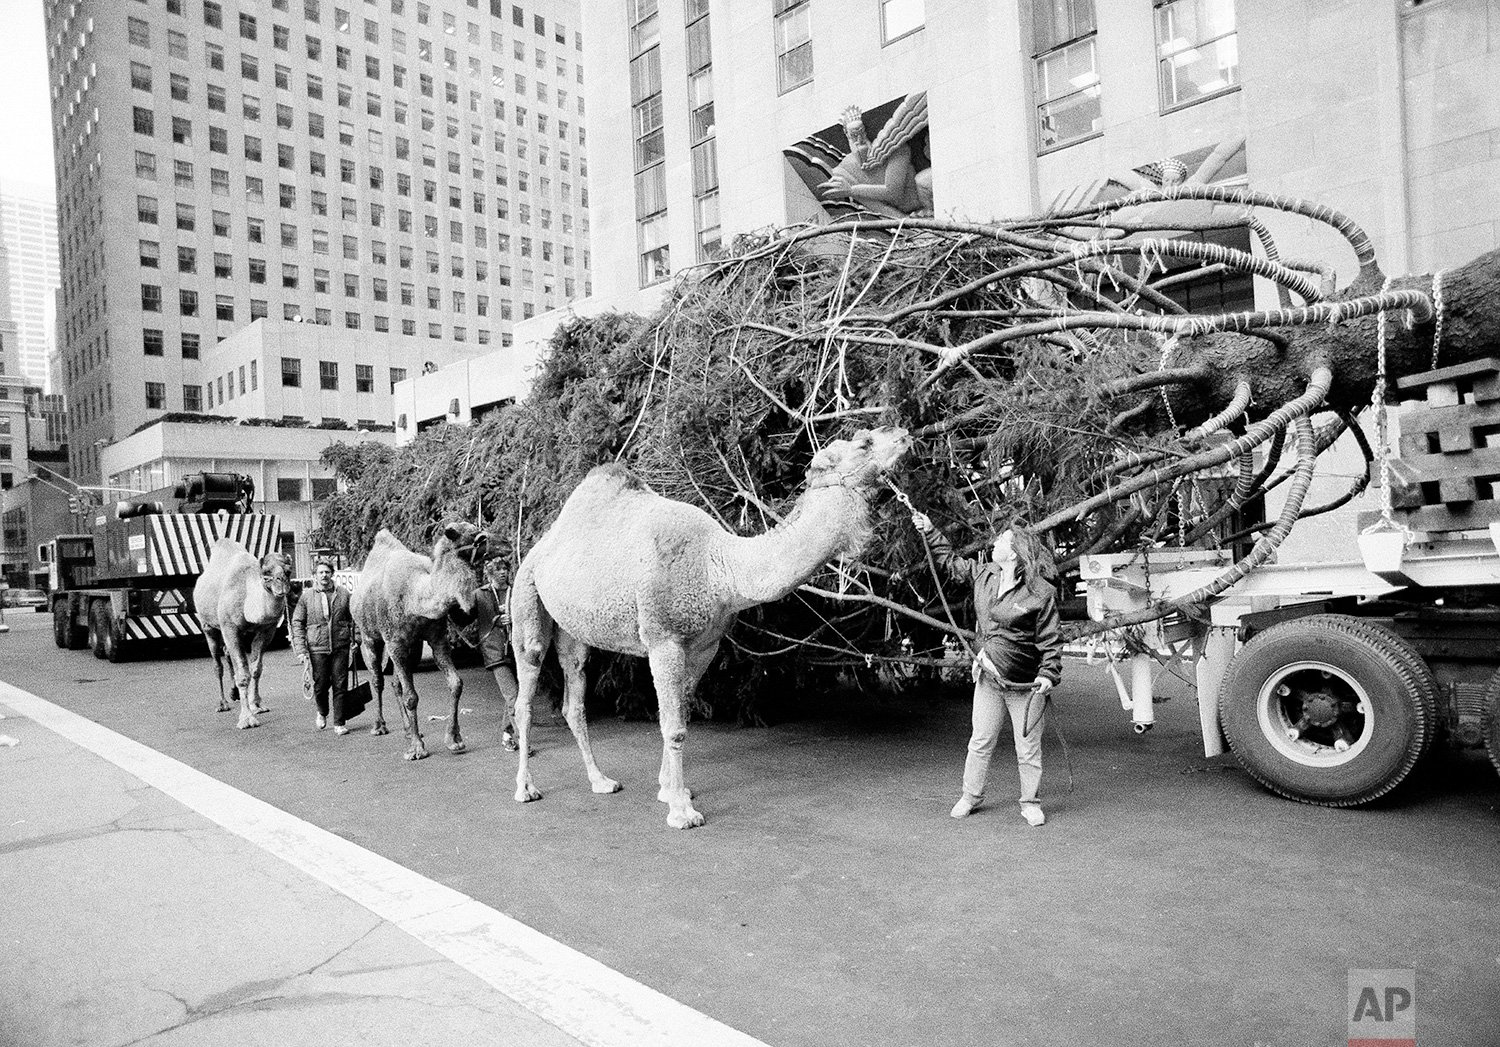  One of the three camels from New York's Radio City Music Hall's Christmas show takes time out from his morning constitutional to nibble on the tree as it arrived in Rockefeller Center, Nov. 16, 1984. The tree will be lit Dec. 3. (AP Photo/Dave Picko